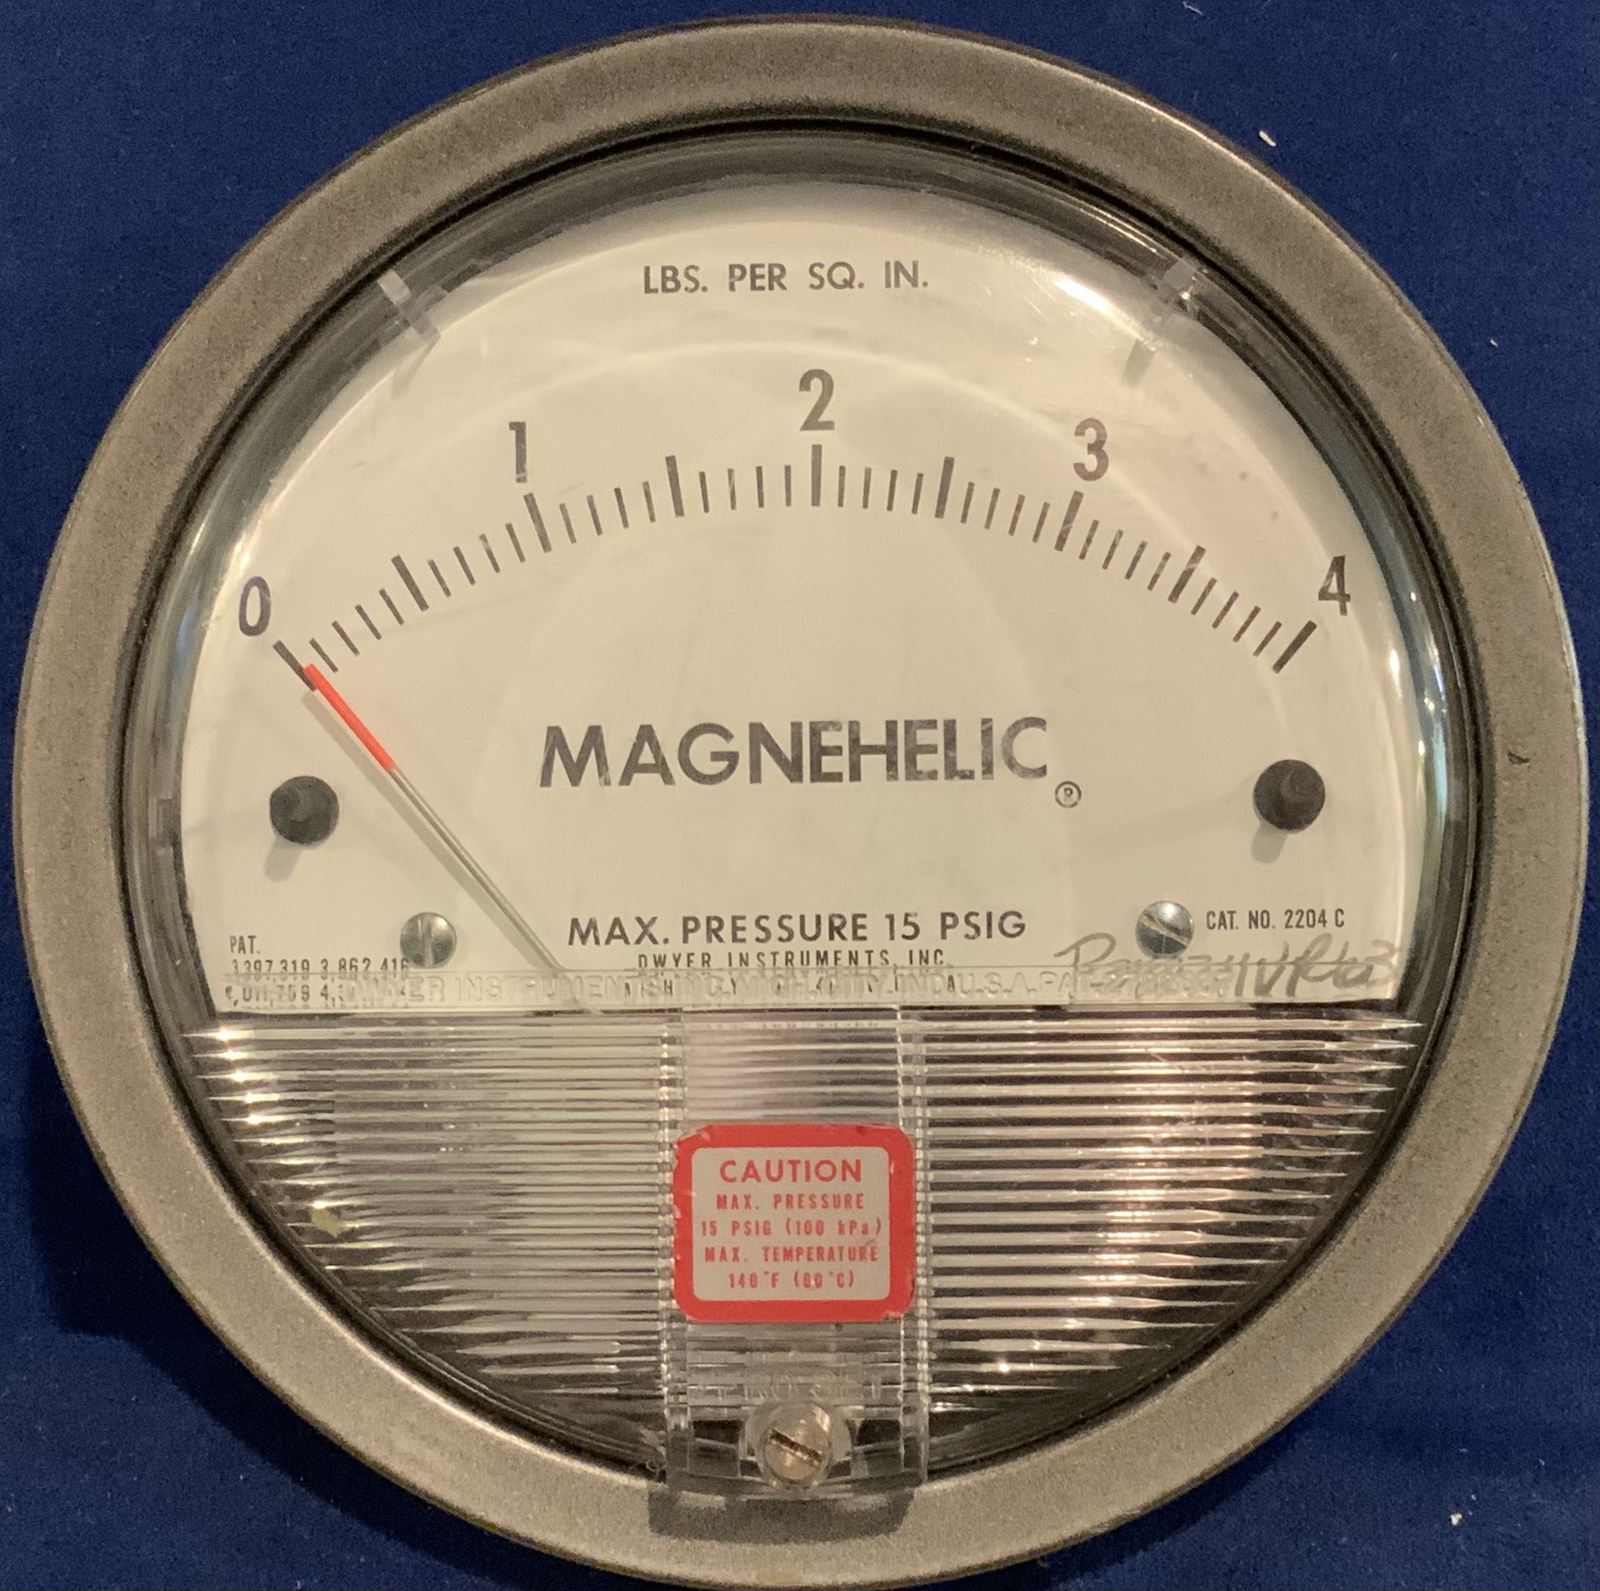 Primary image for MAGNEHELIC GAUGE Cat No. 2204, Max. Pressure 15 PSIG, Used, great condition